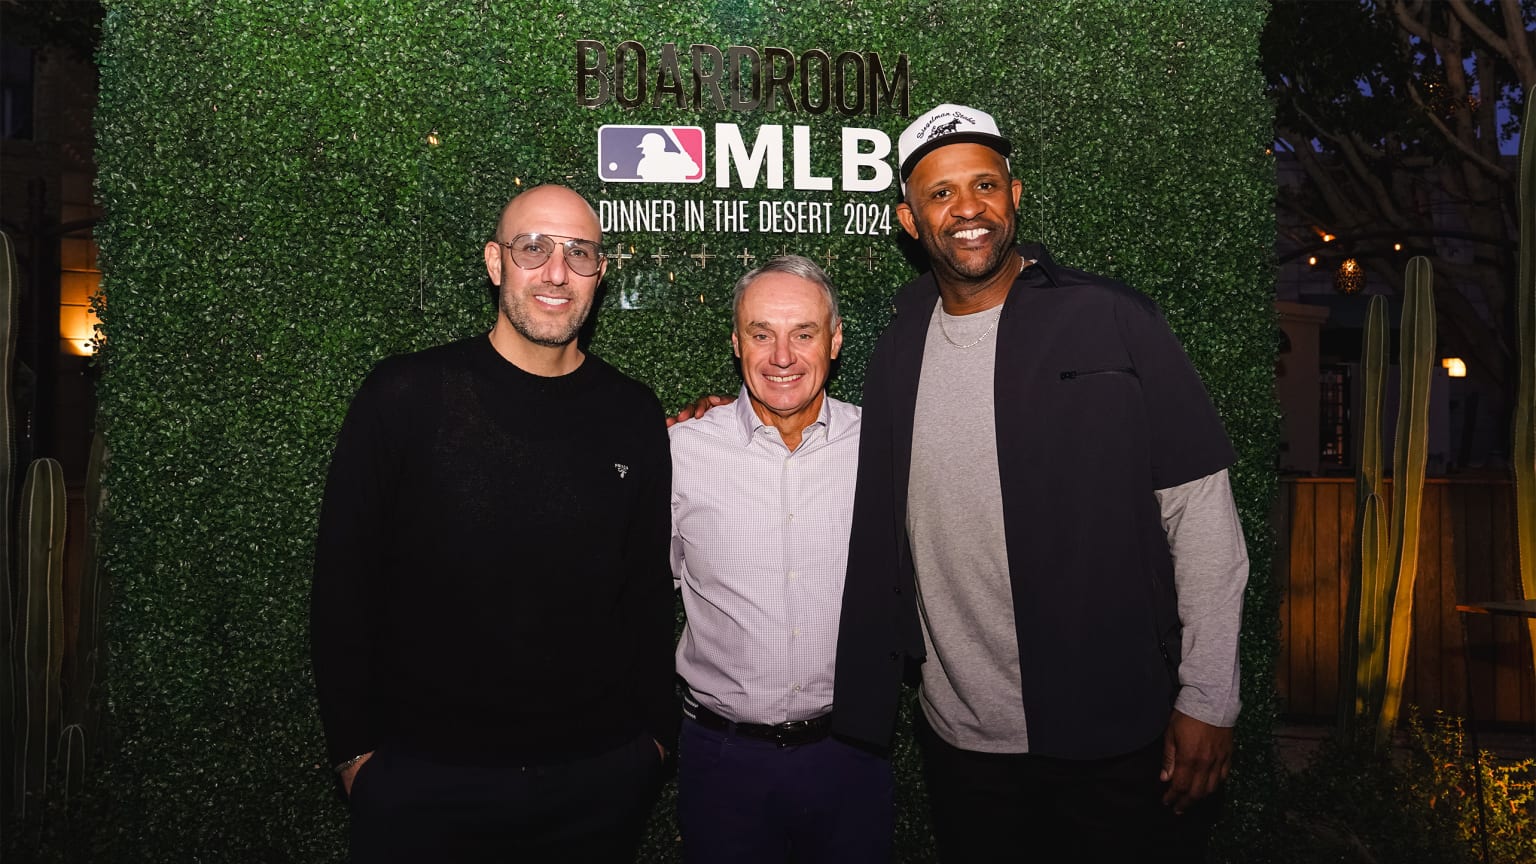 MLB announces partnership with Boardroom sports and entertainment company